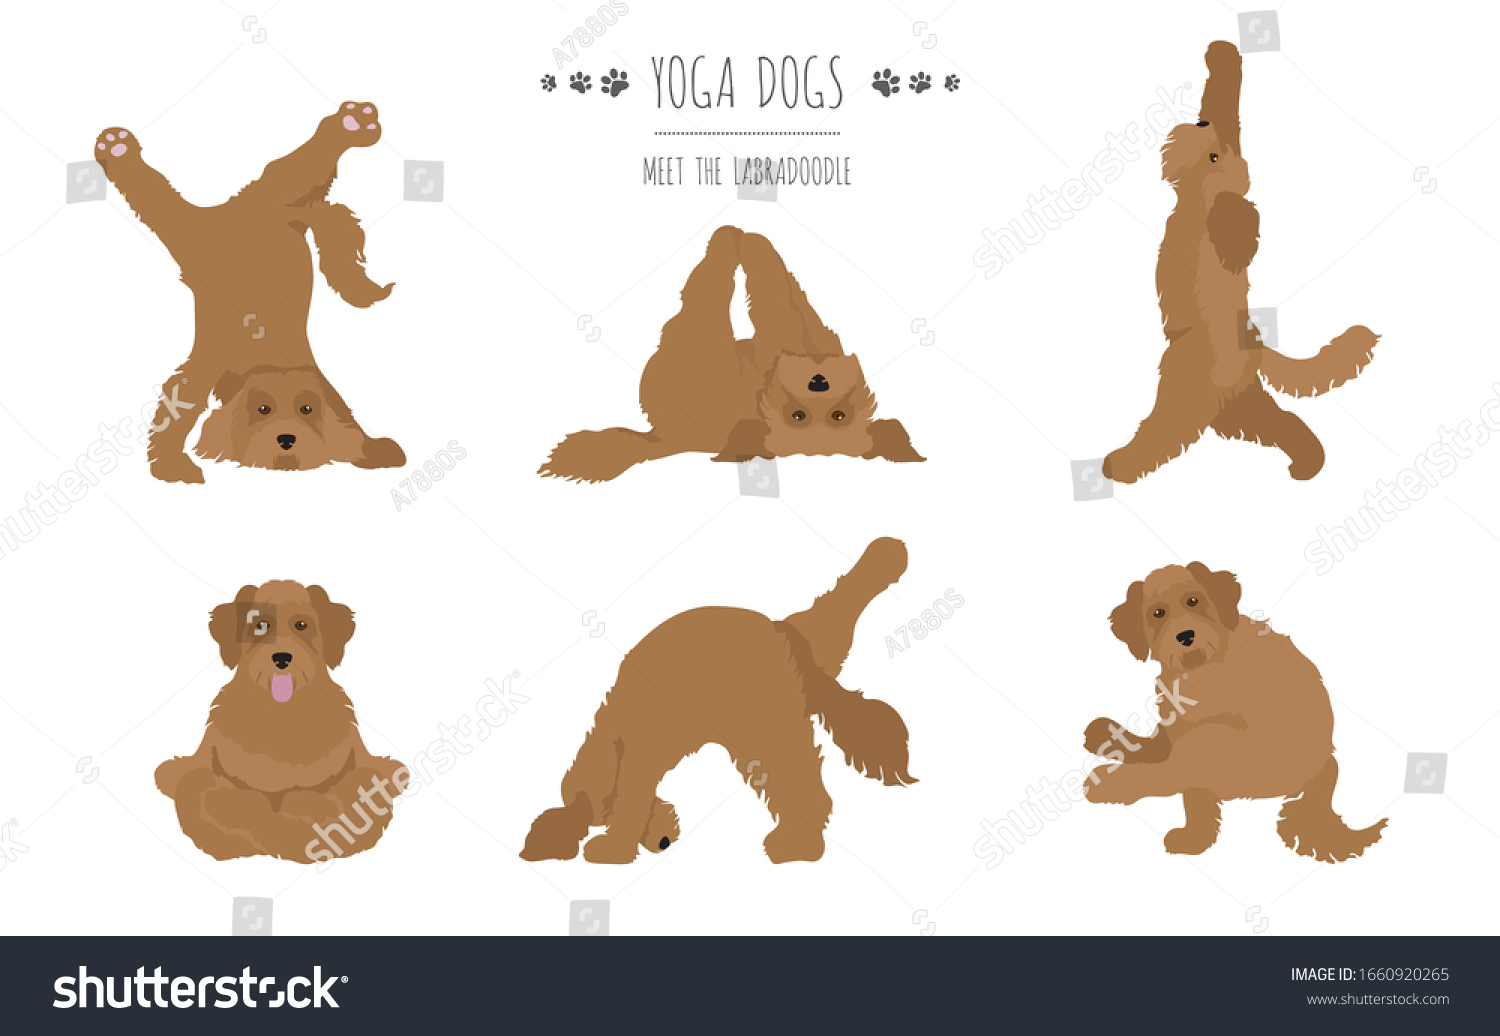 SVG of Yoga dogs poses and exercises poster design. Labradoodle clipart. Vector illustration svg